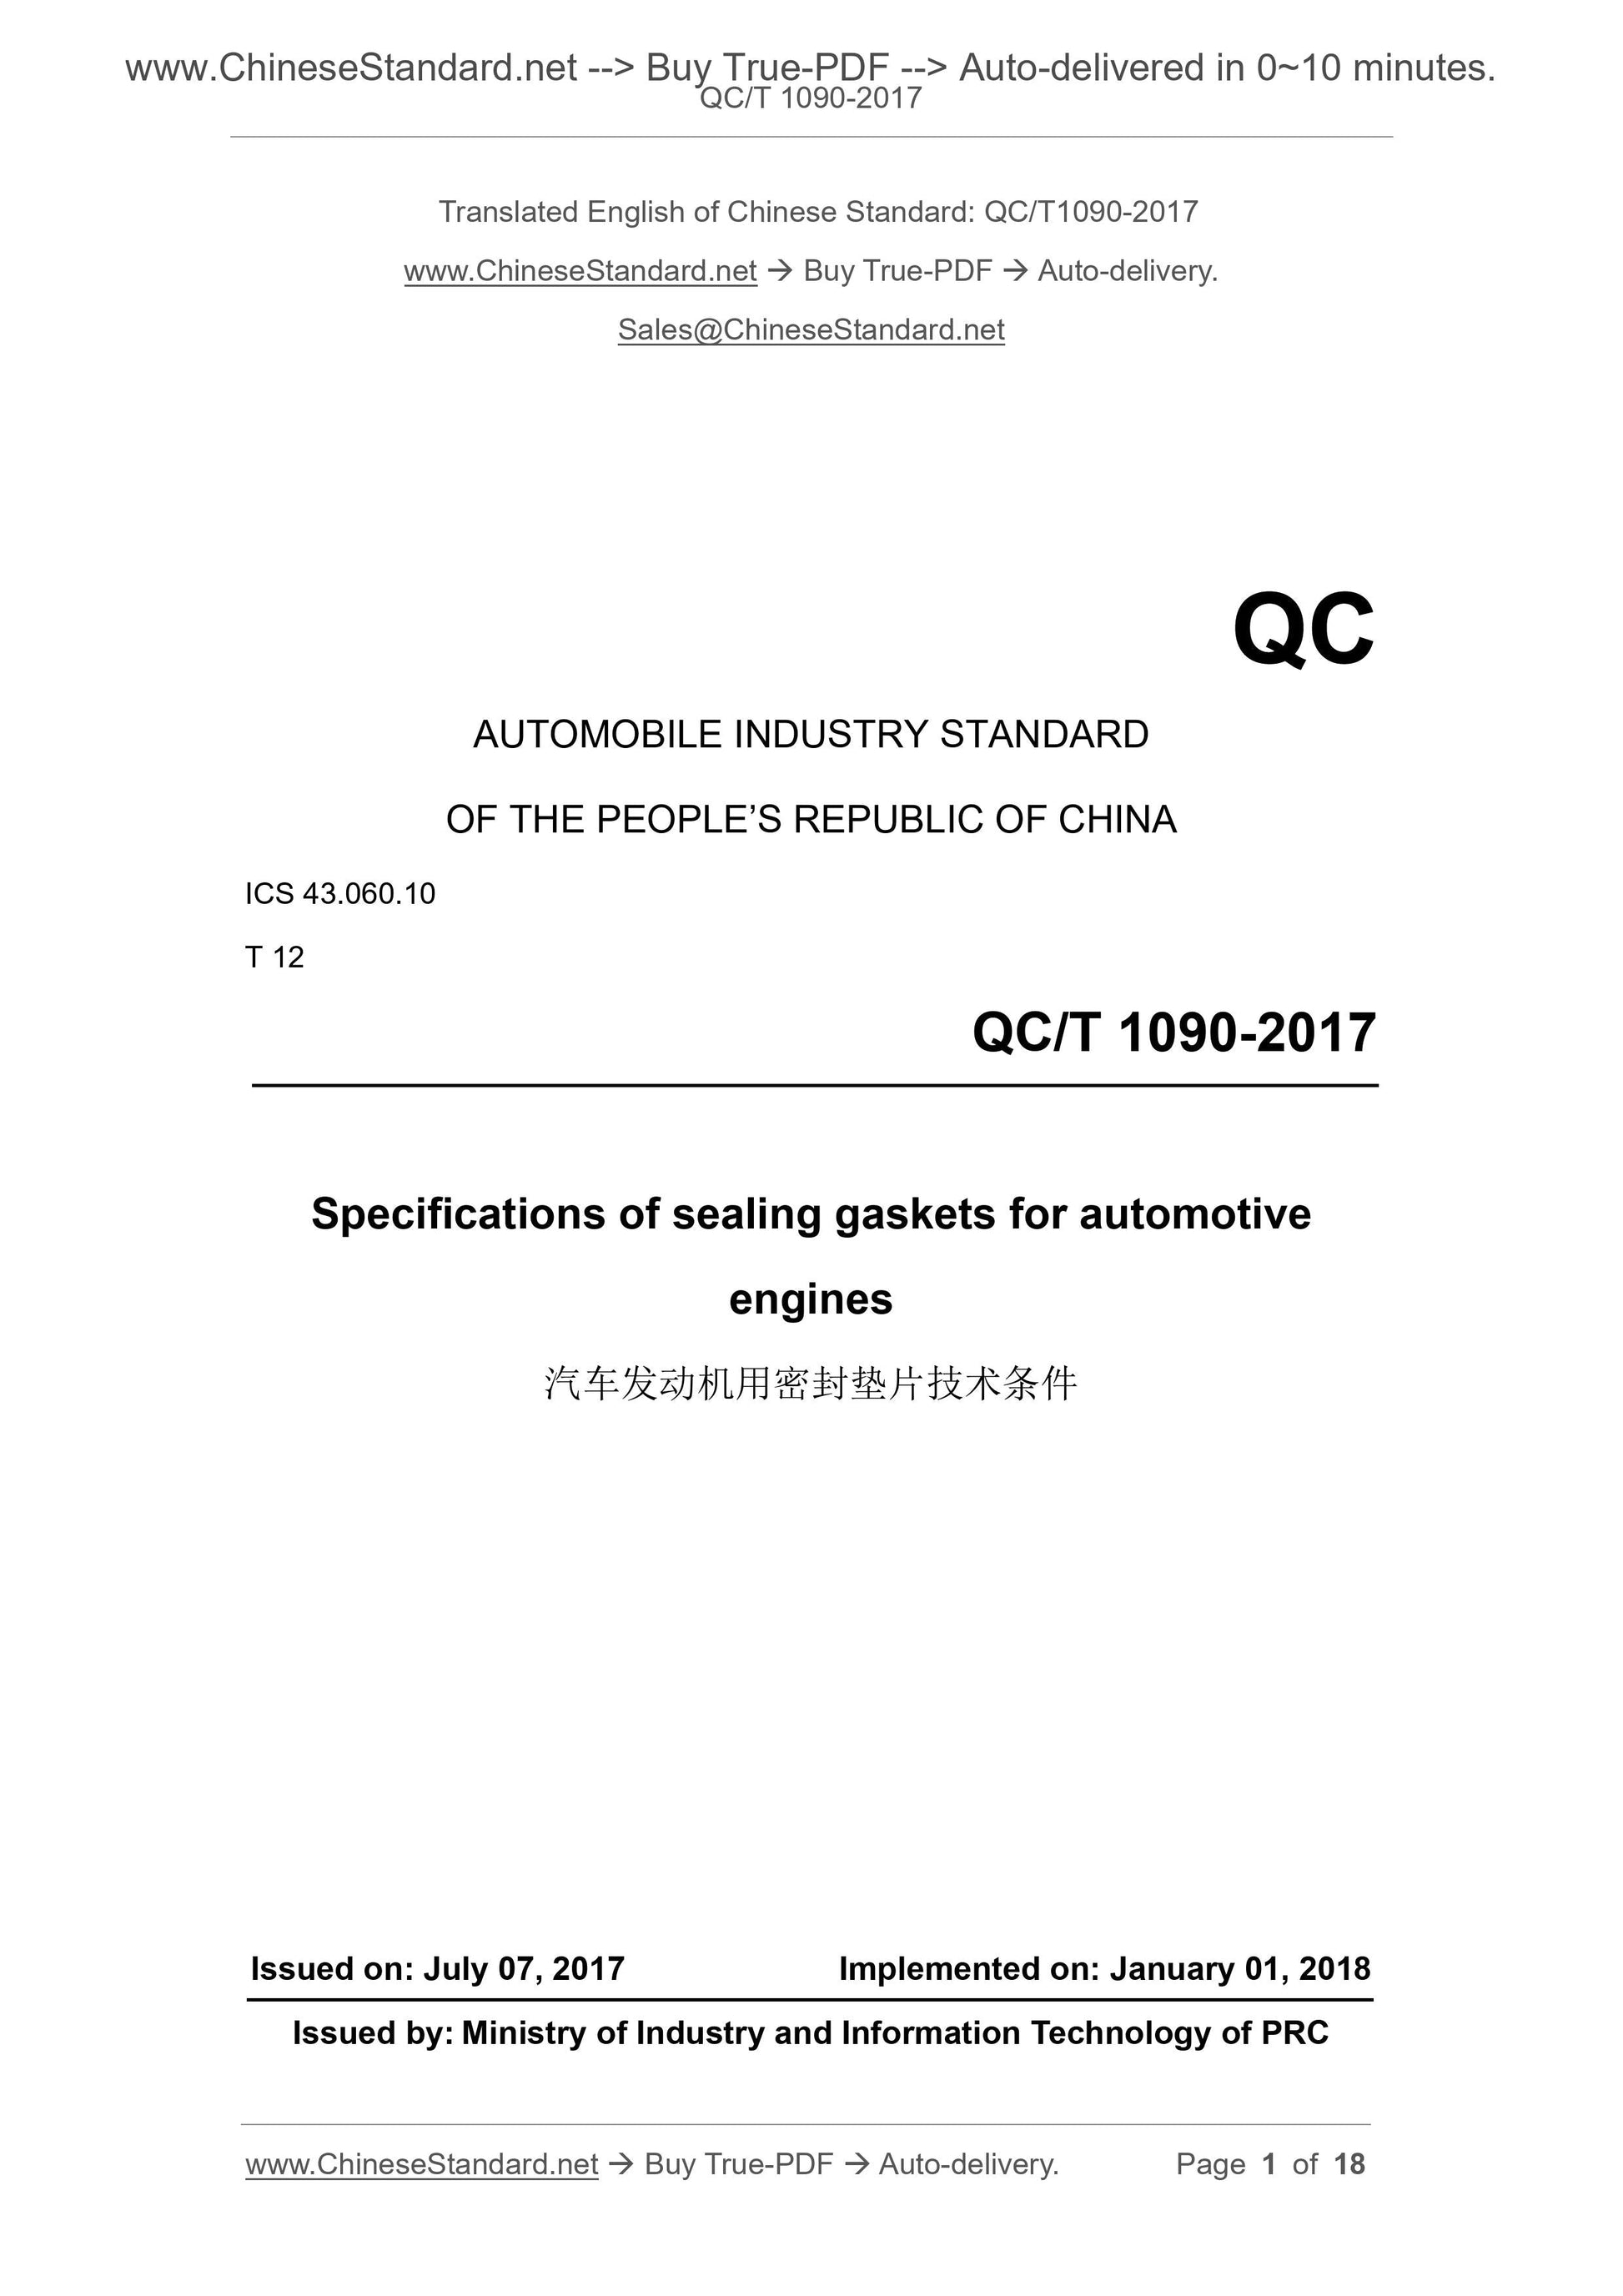 QC/T 1090-2017 Page 1